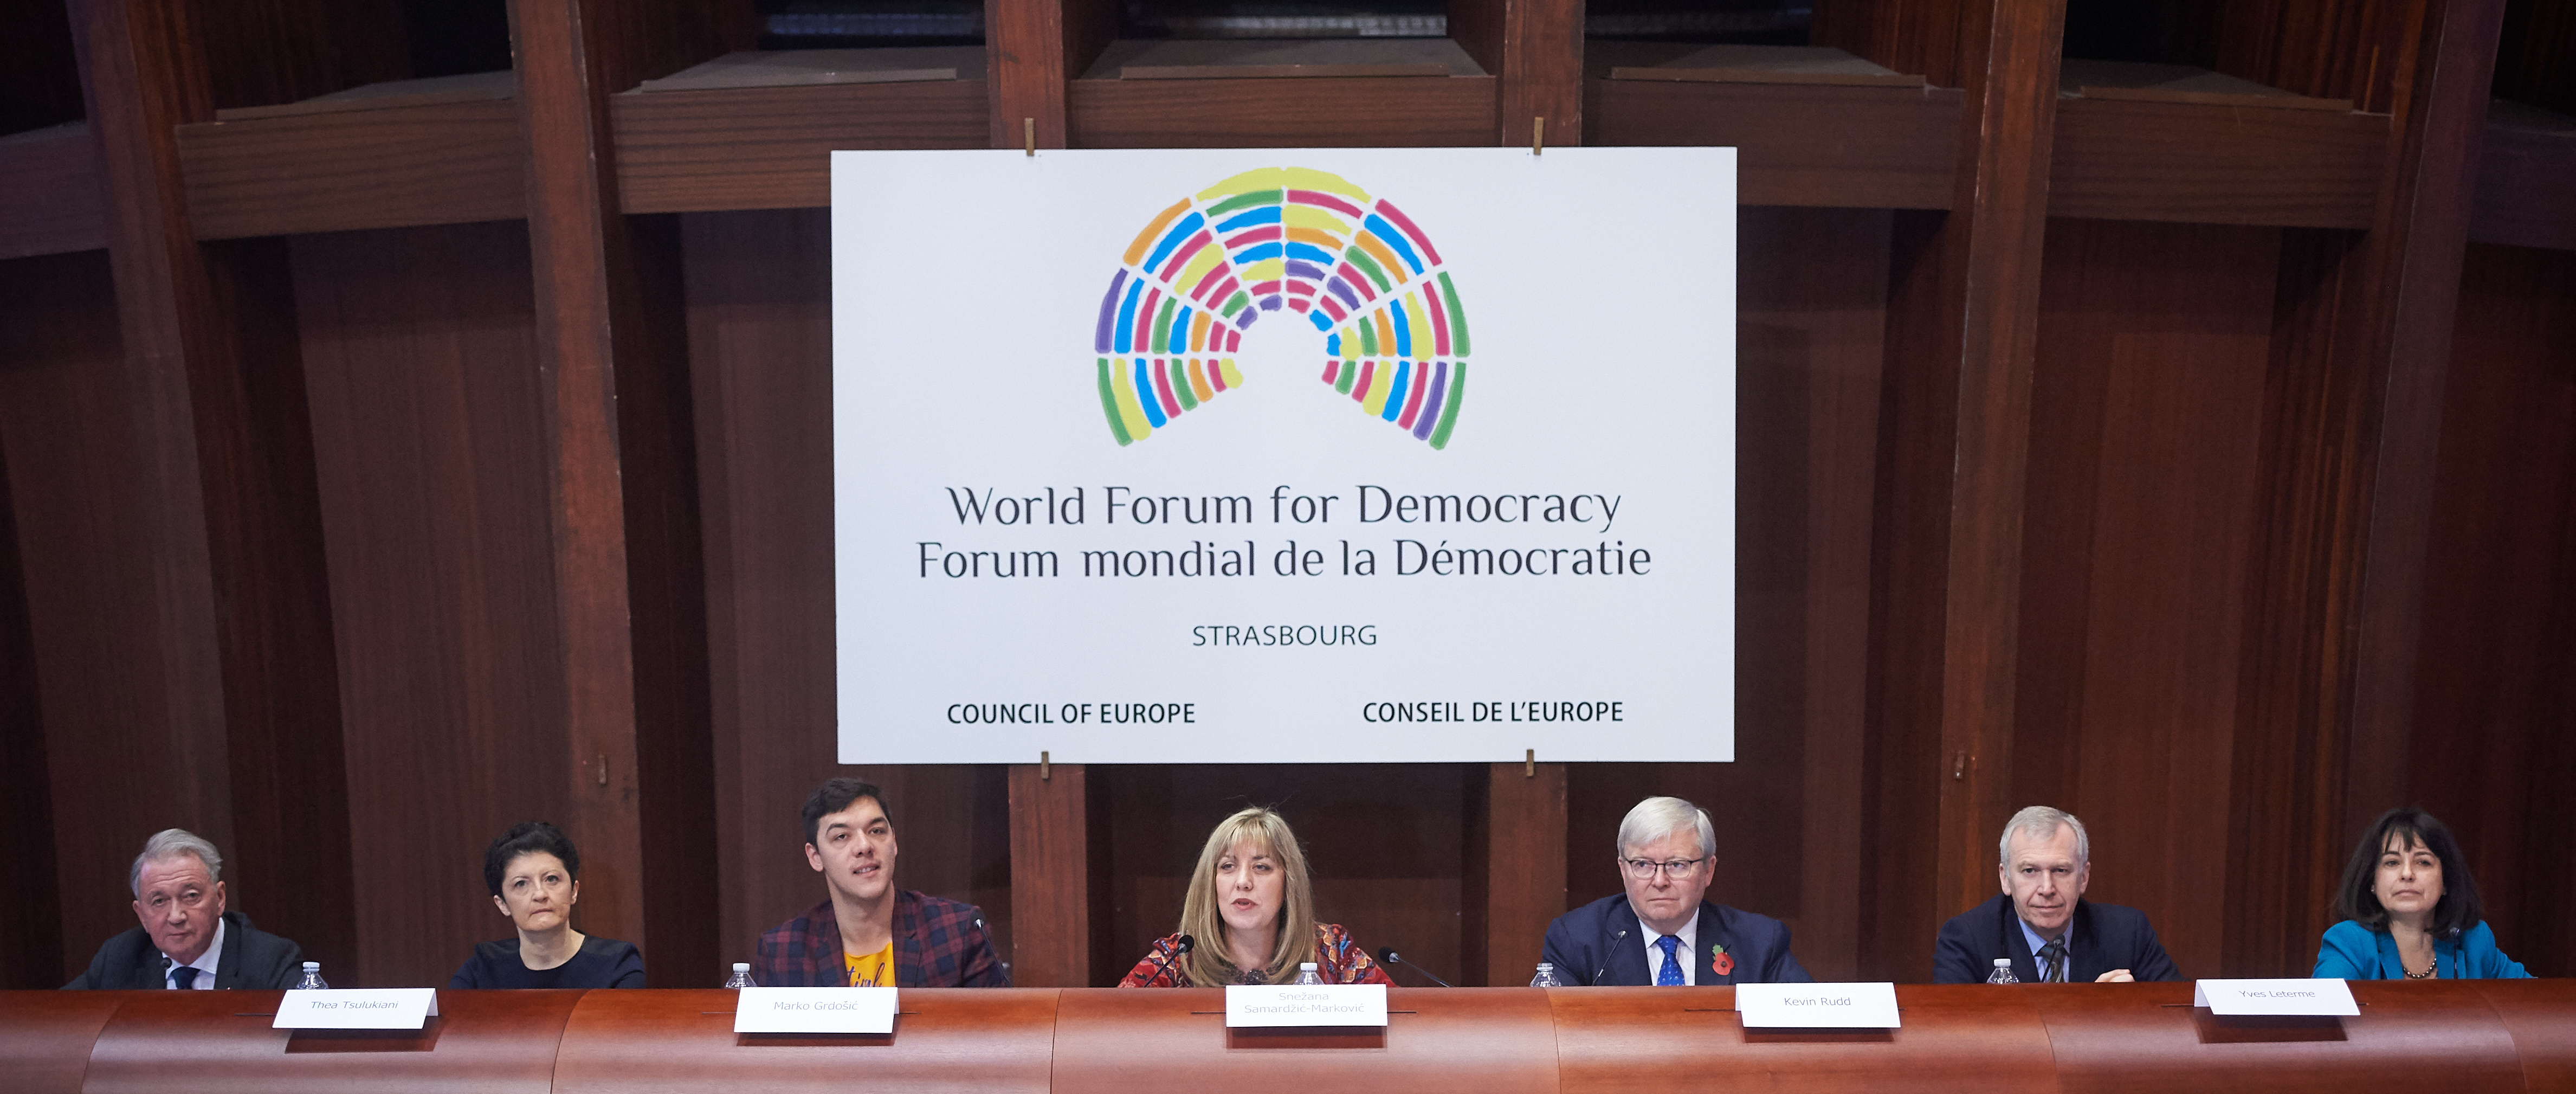 The Secretary-General during the high-level plenary panel discussion at the annual World Forum for Democracy. Photo credit: COE.